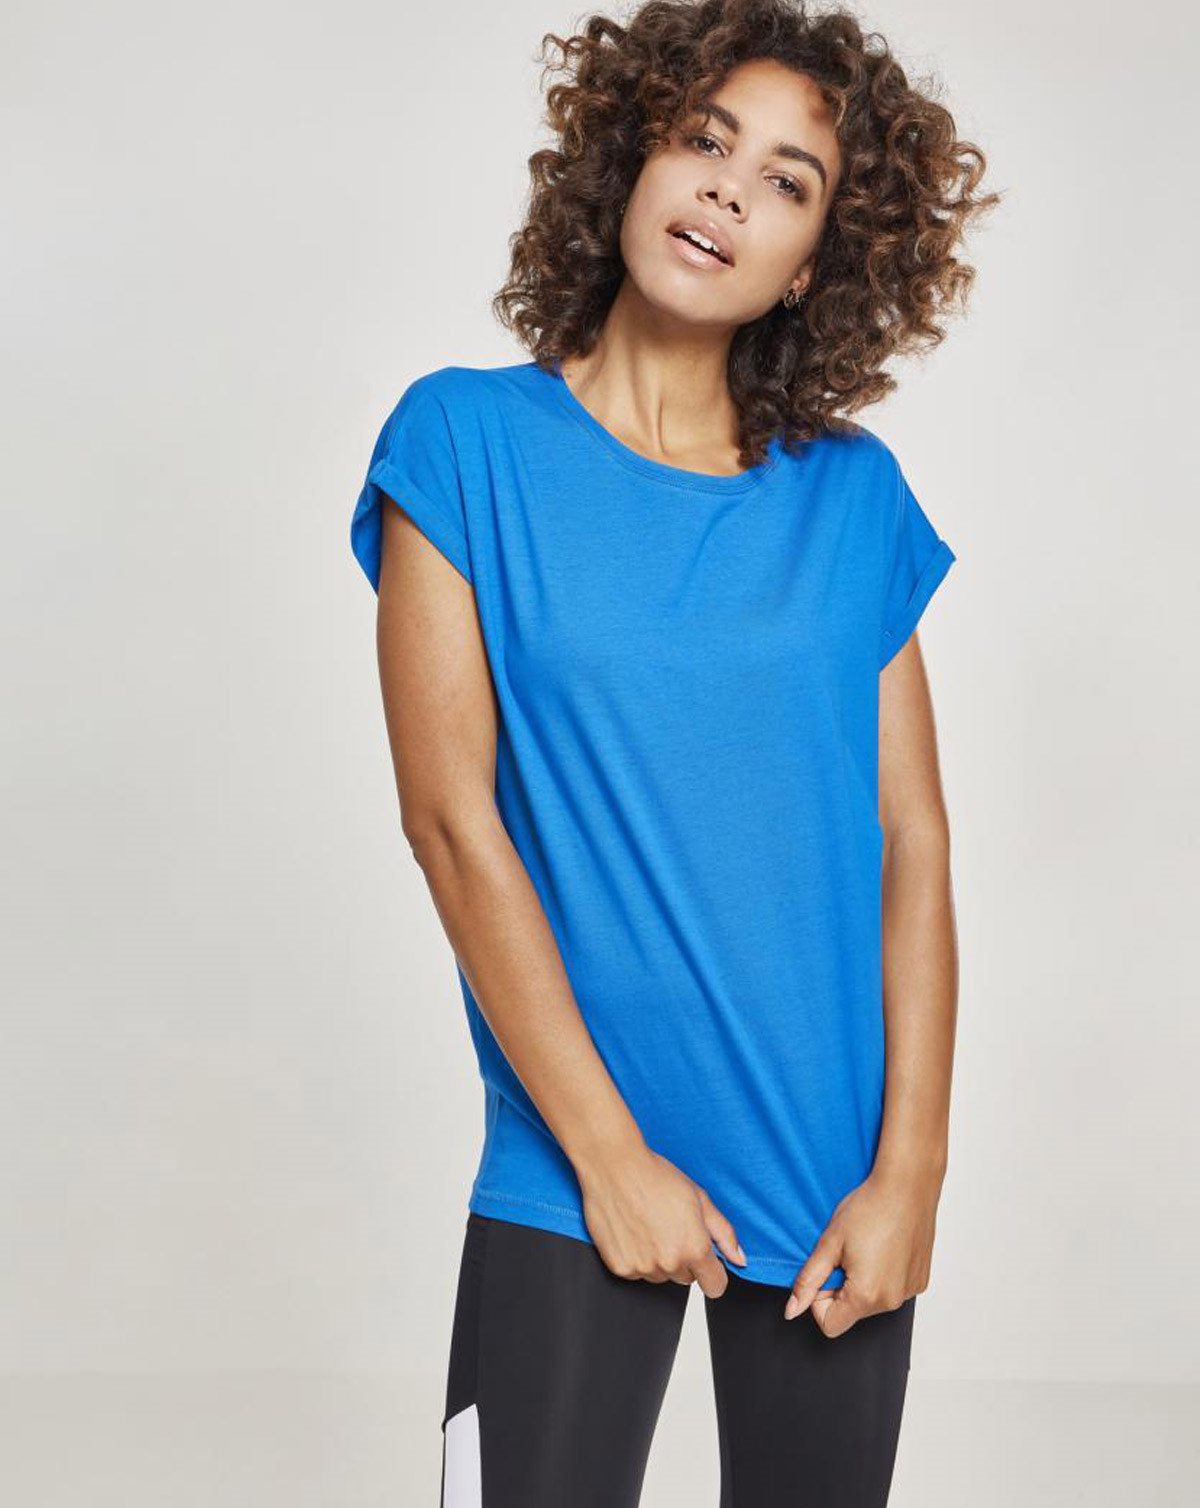 Urban Classics Ladies Extended Shoulder Tee (Bright Blue, S)